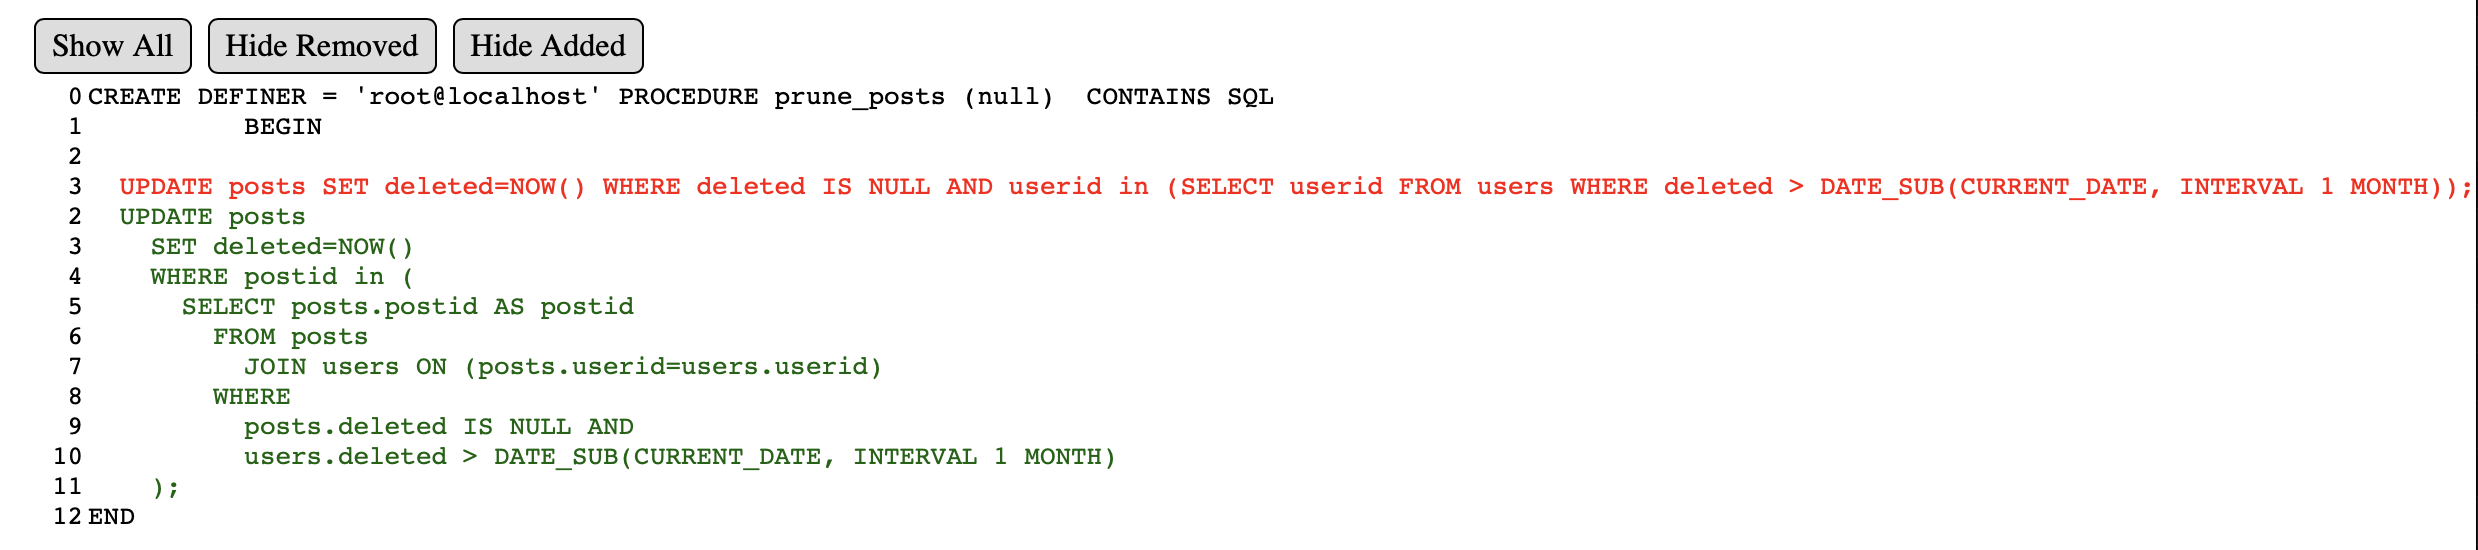 Example stored procedure diff showing colored text indicating unchanged, removed, and added lines to a very silly stored procedure